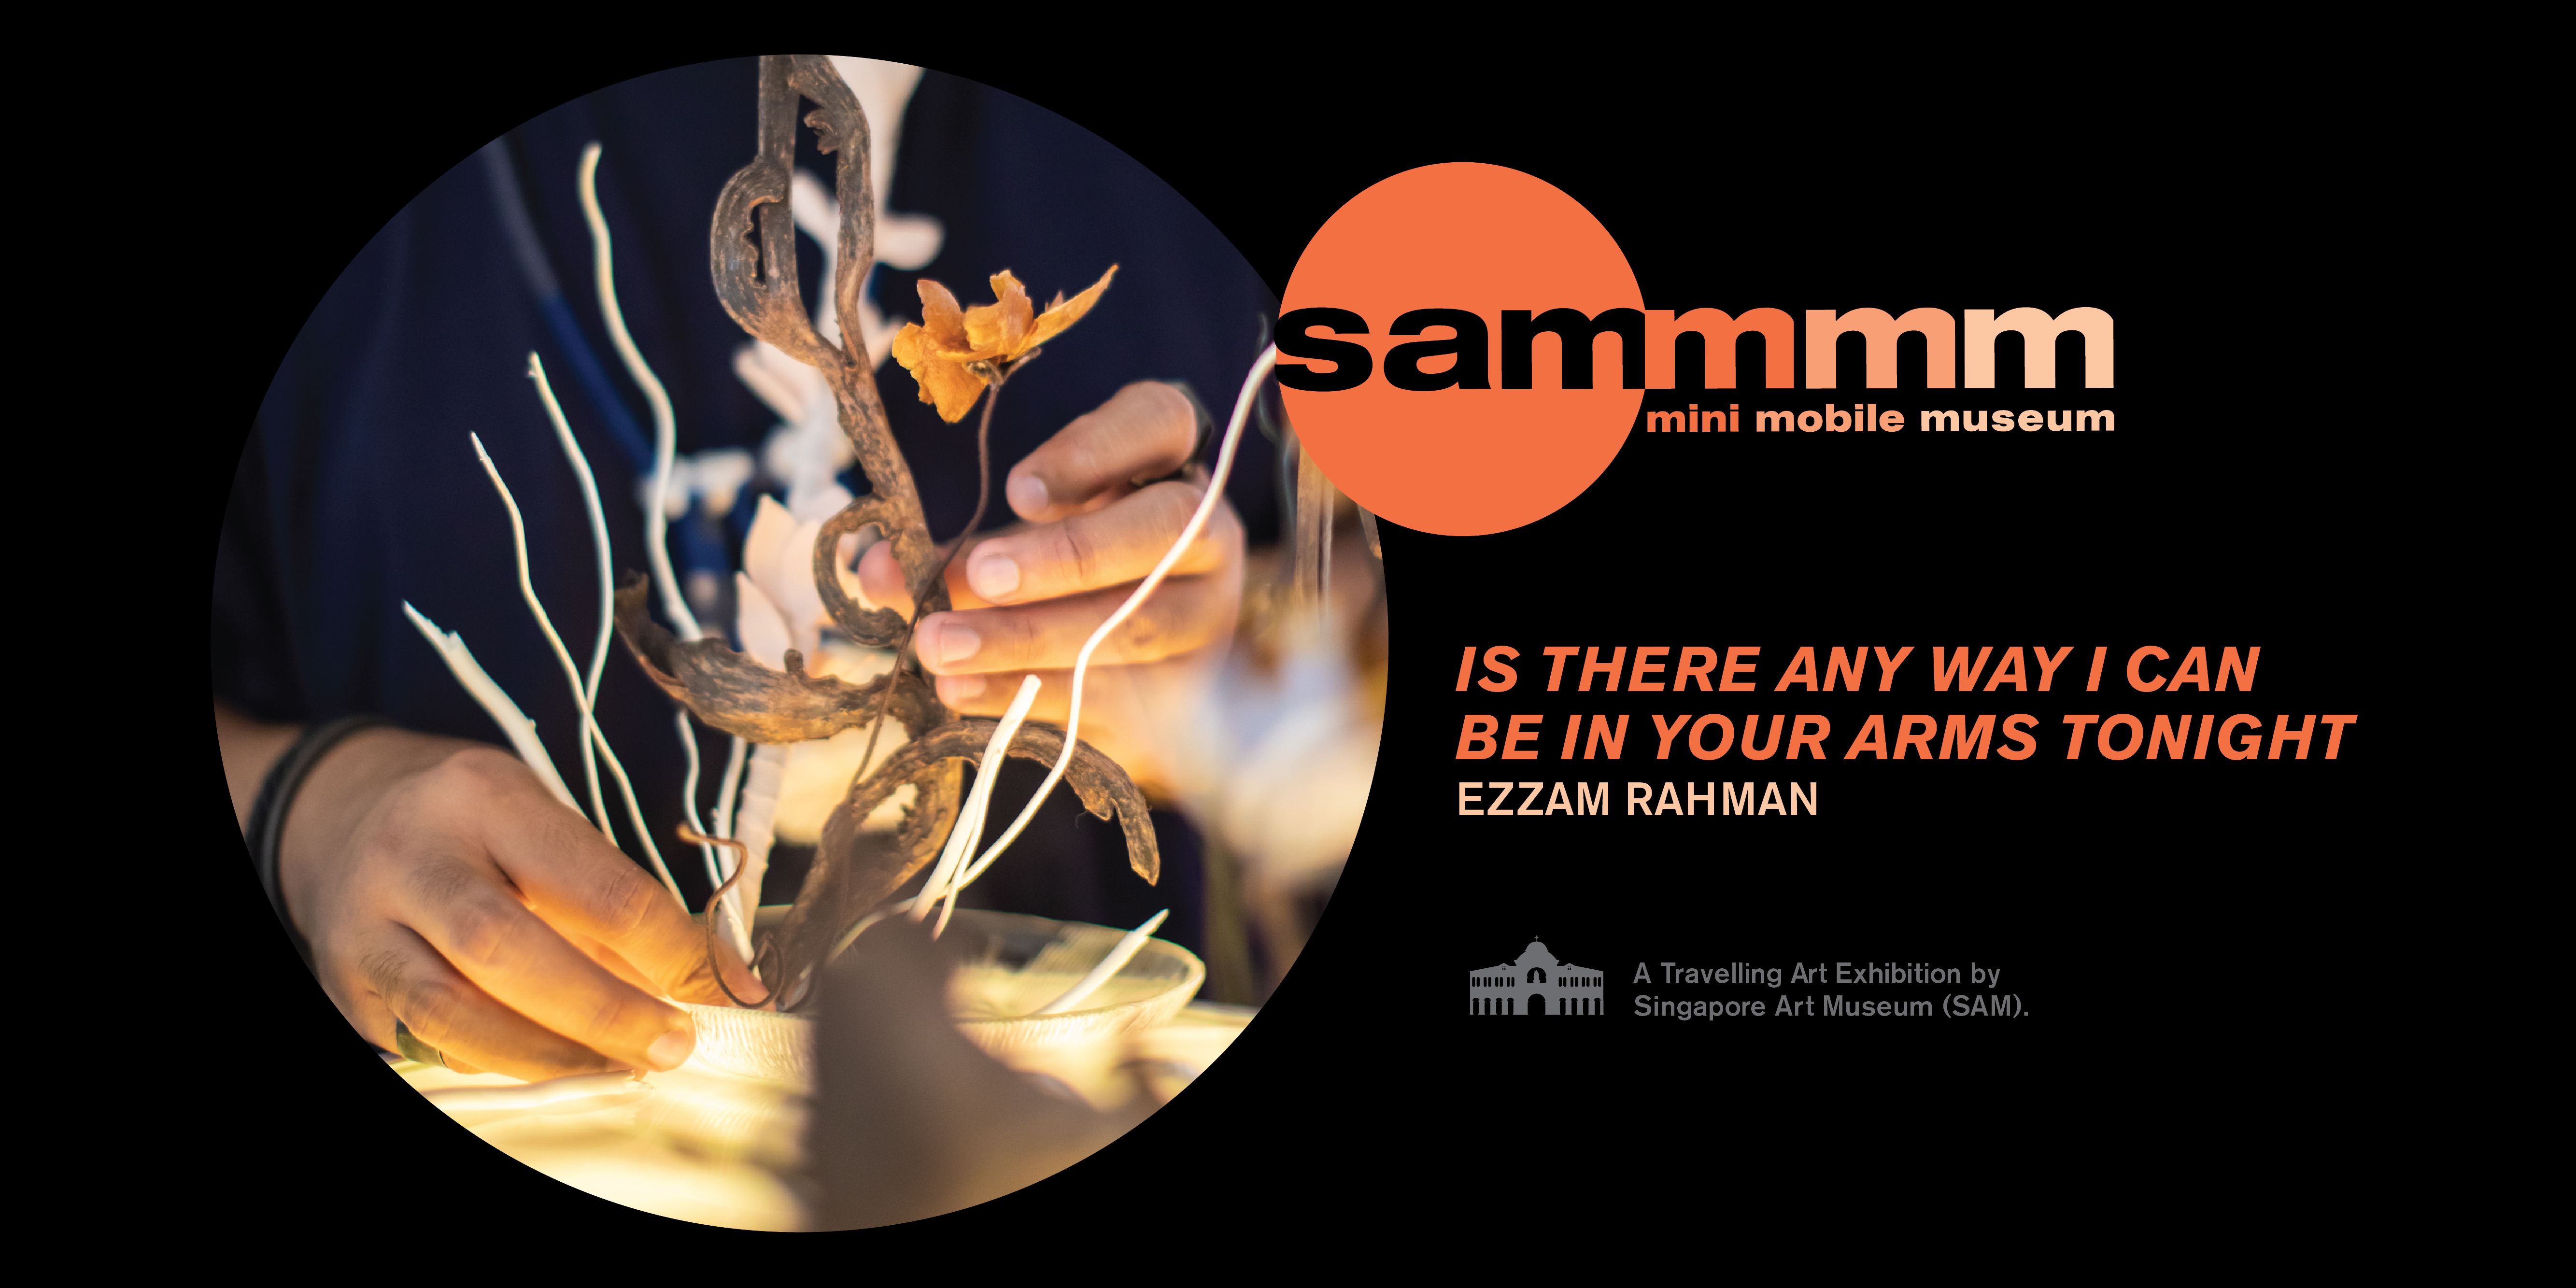 SAM Mini Mobile Museum: 'is there any way i can be in your arms tonight' by Ezzam Rahman